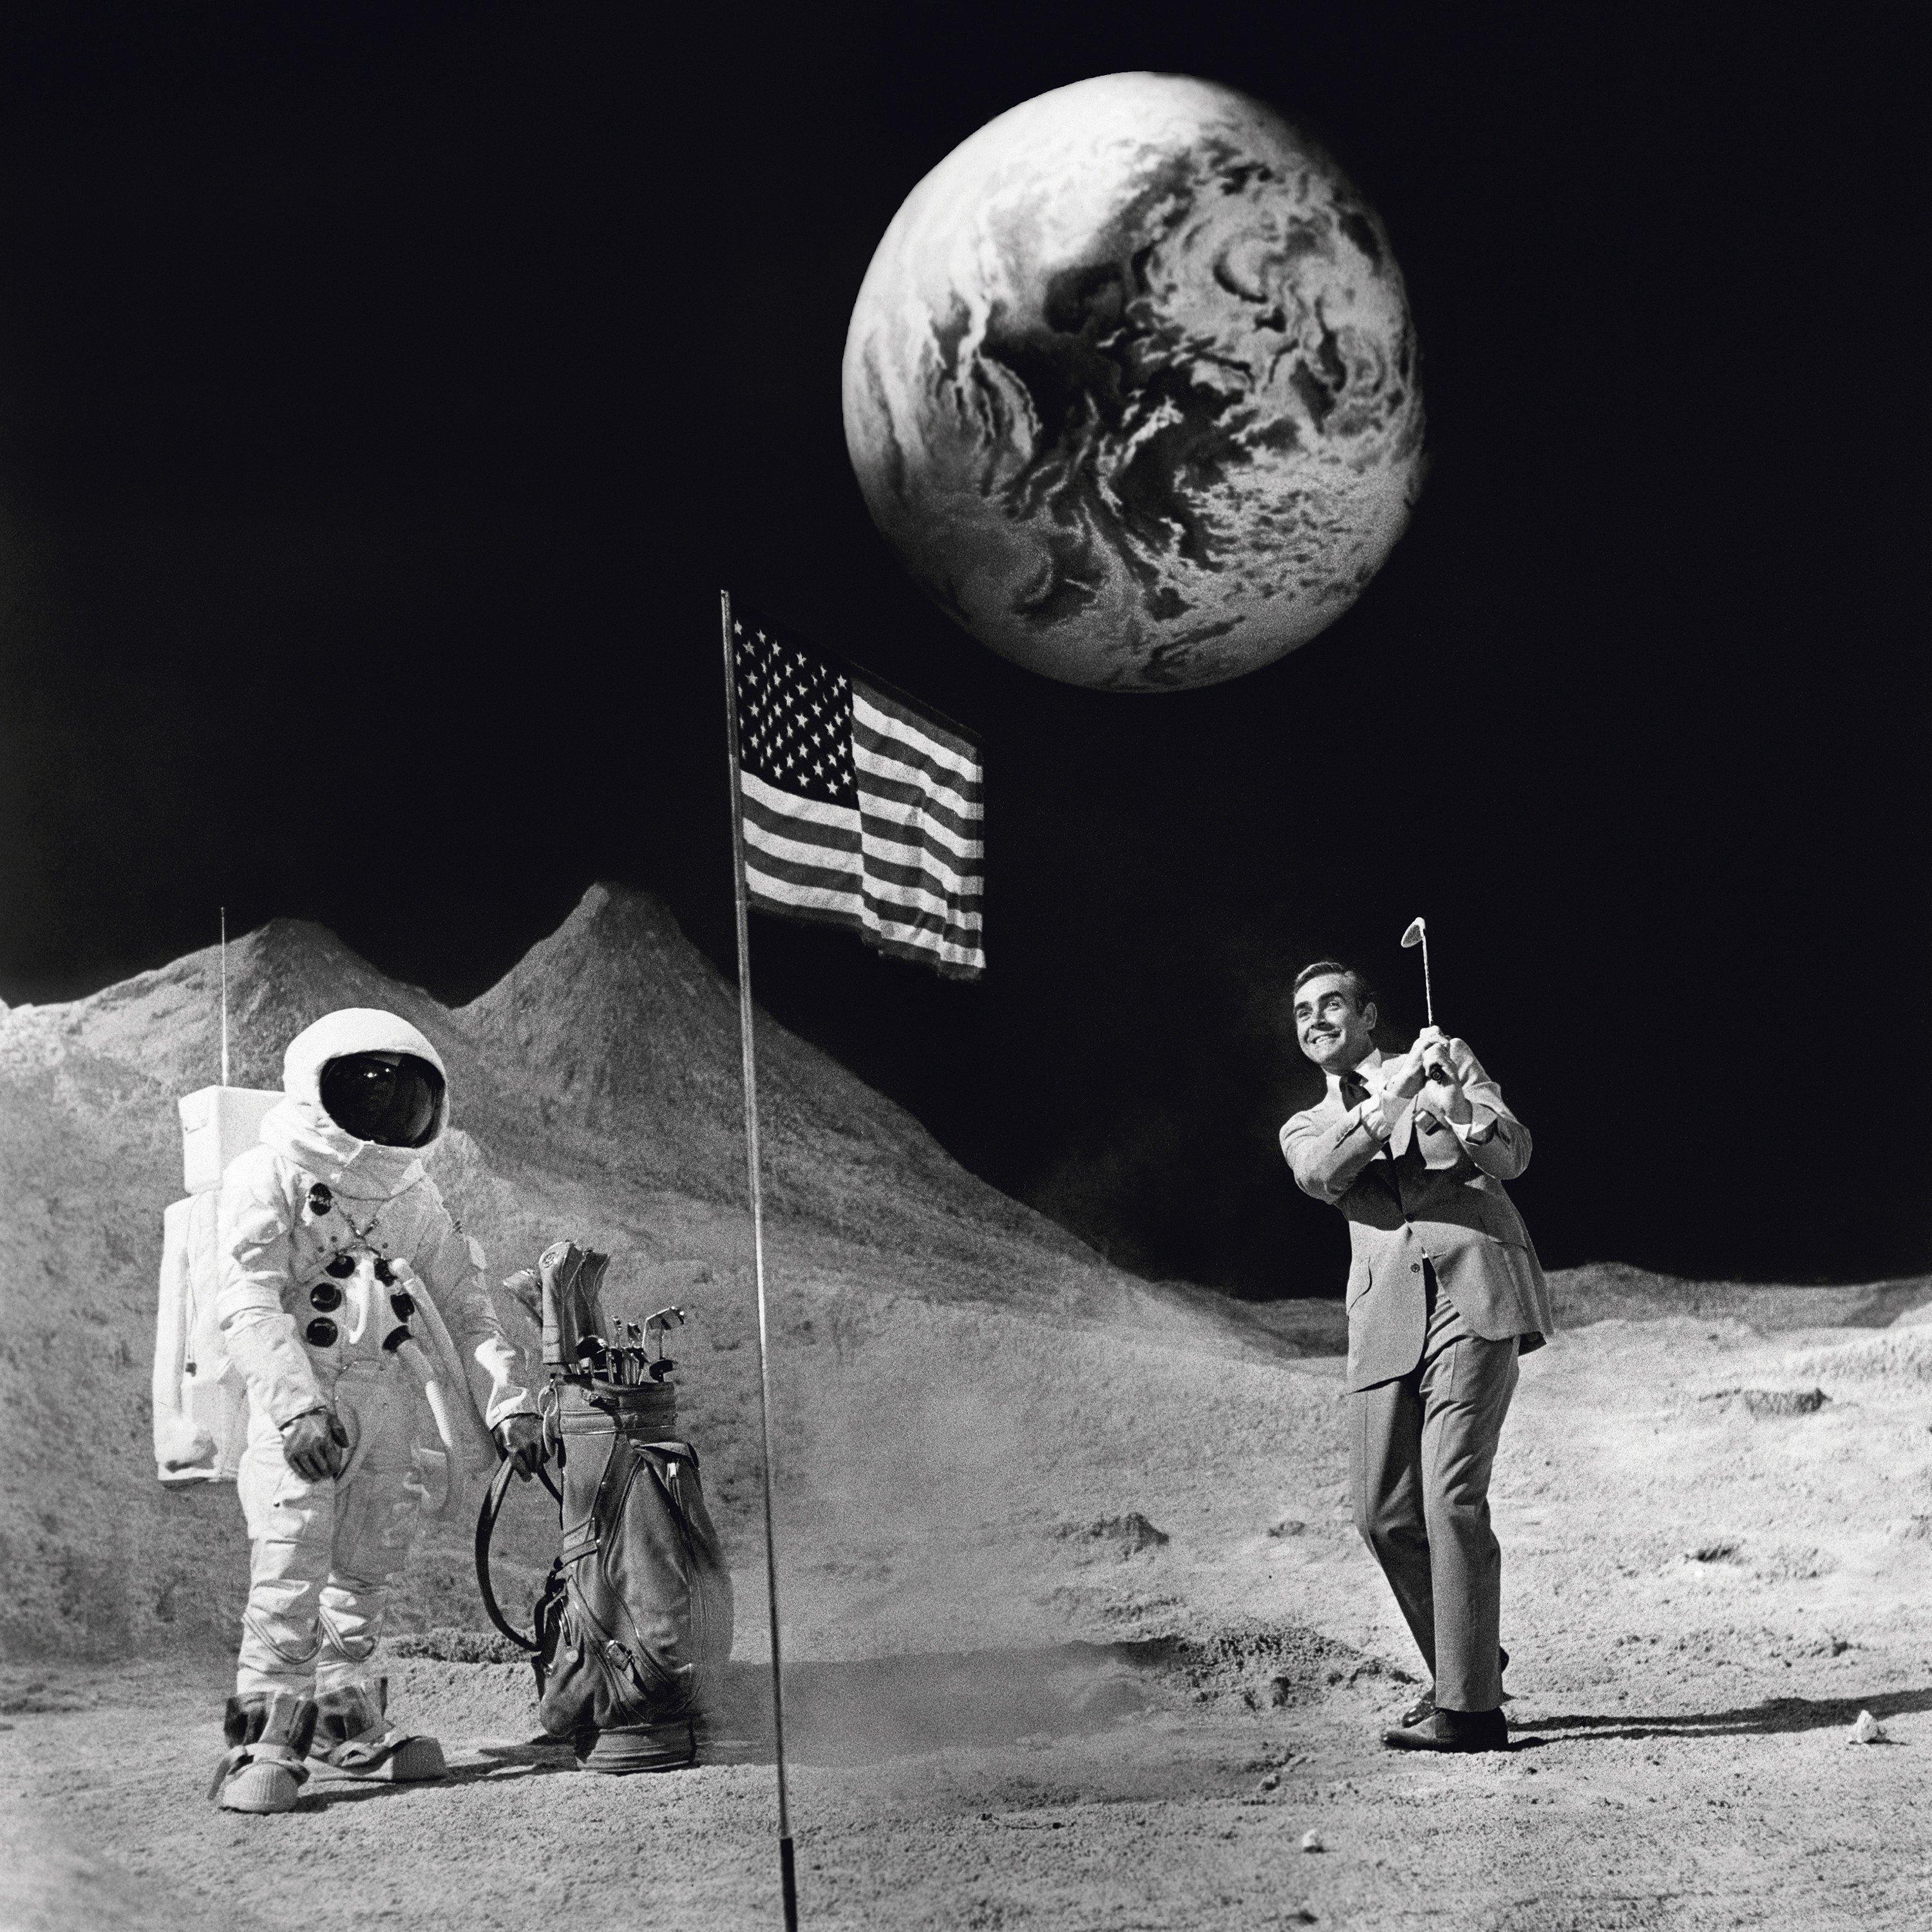 Sean Connery on the Moon, 1971
Silver Gelatin Print
Estate signature stamped and numbered edition of 50
with certificate of authenticity from the Terry O'Neill Estate

Re-creating astronaut Alan Shepard’s famed golfing on the moon picture, Connery